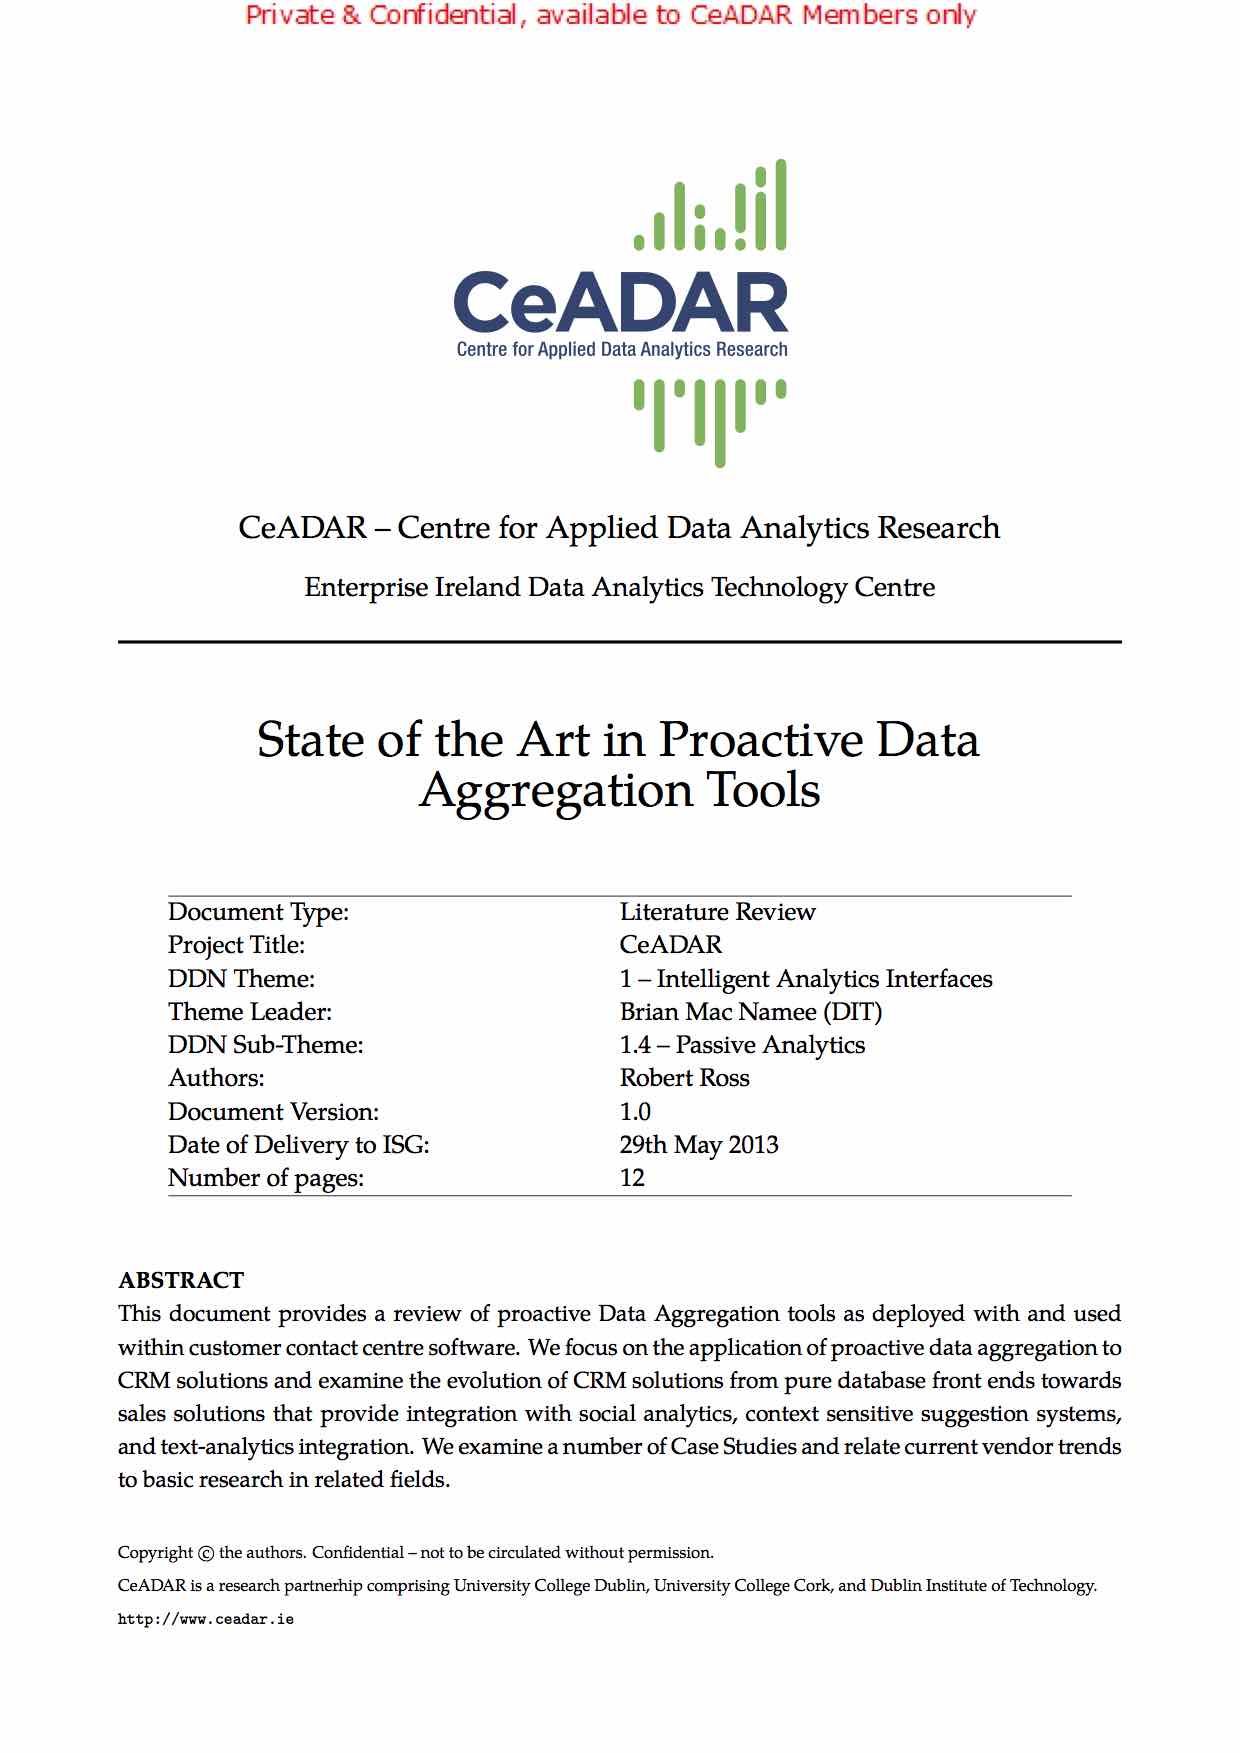 State of the Art Report (PDF)